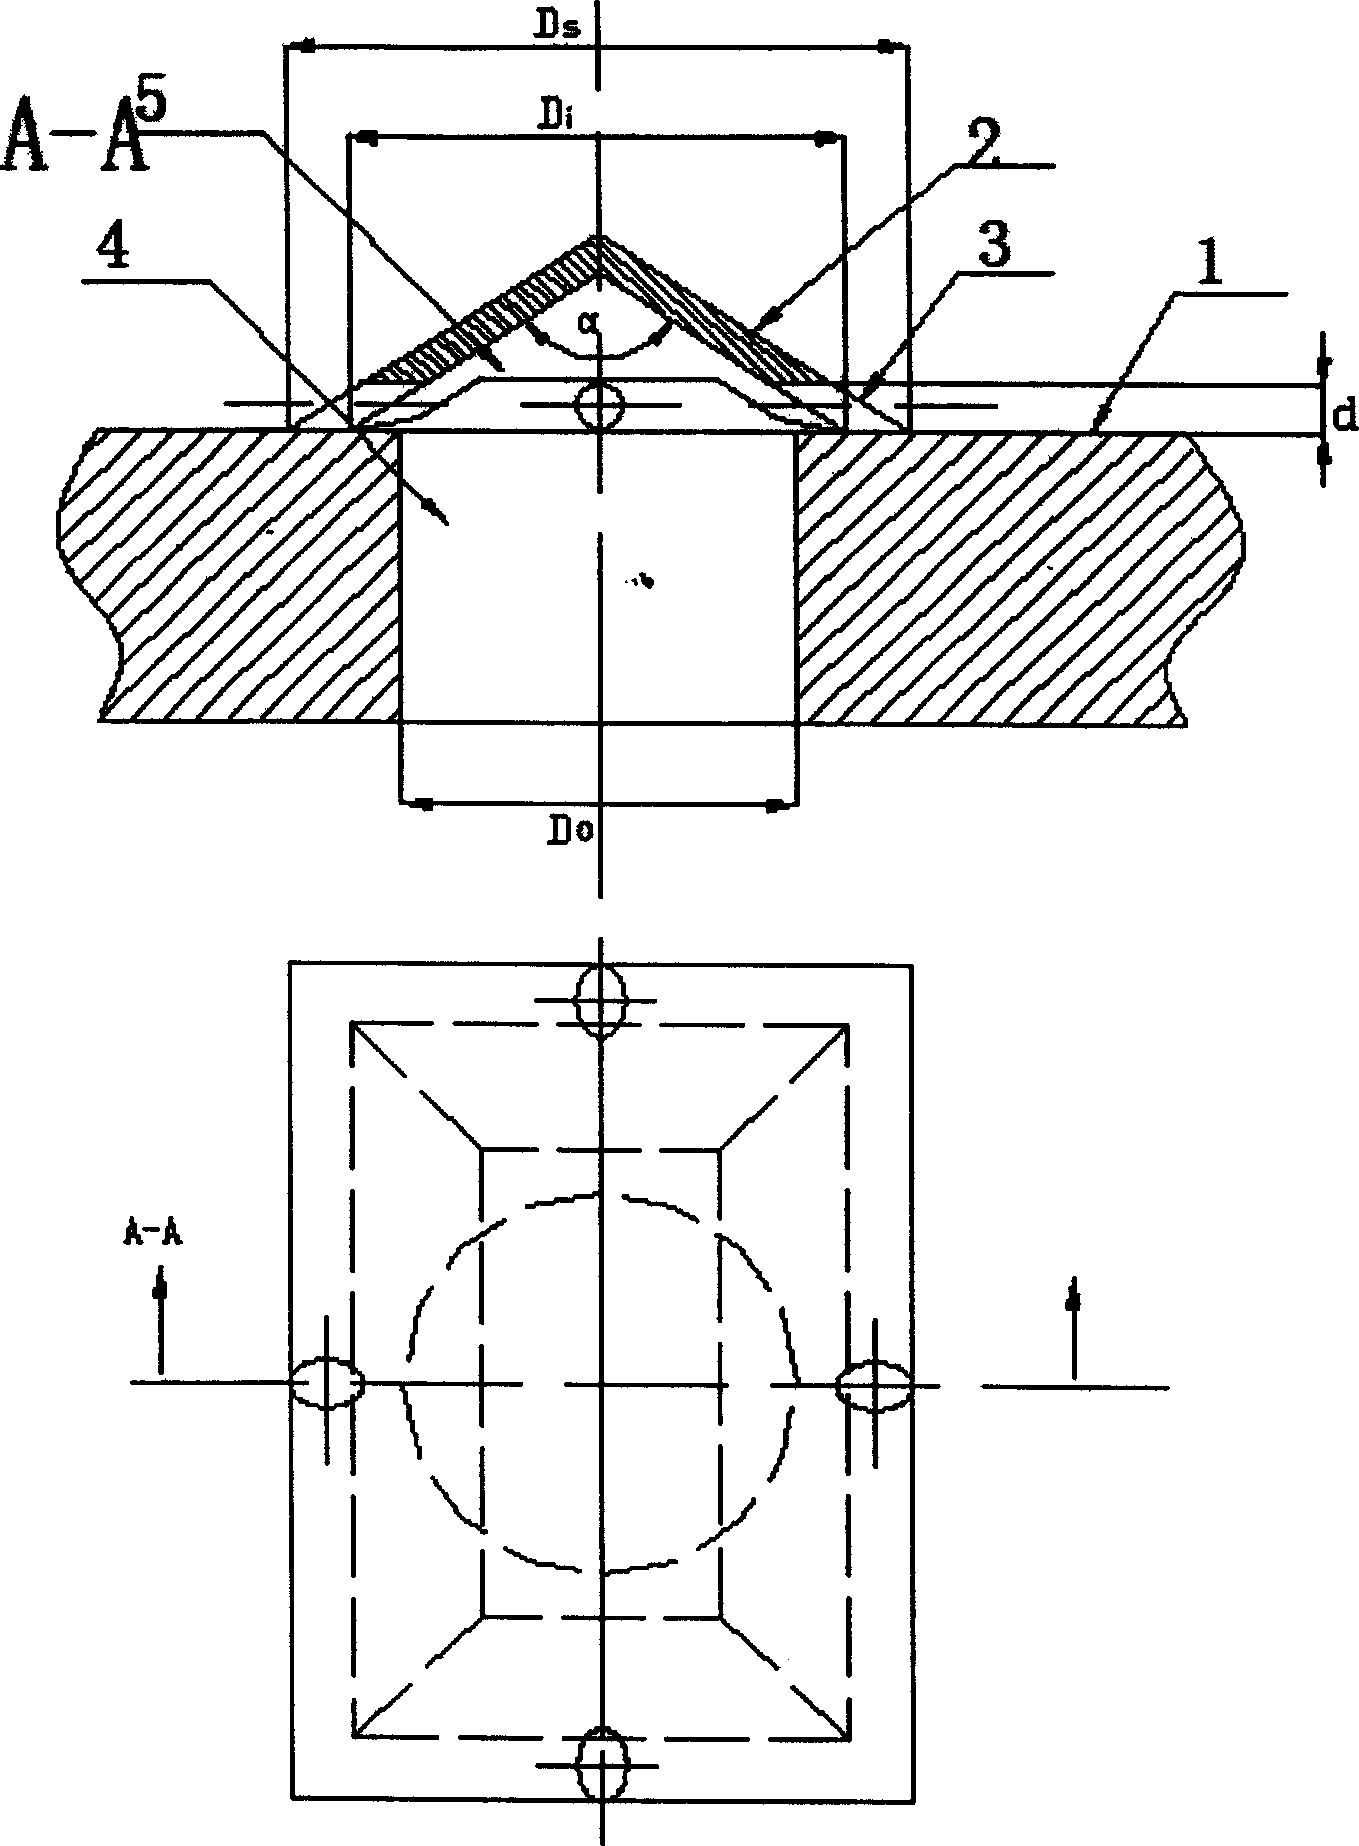 Fluidized bed reactor gases distributing plate